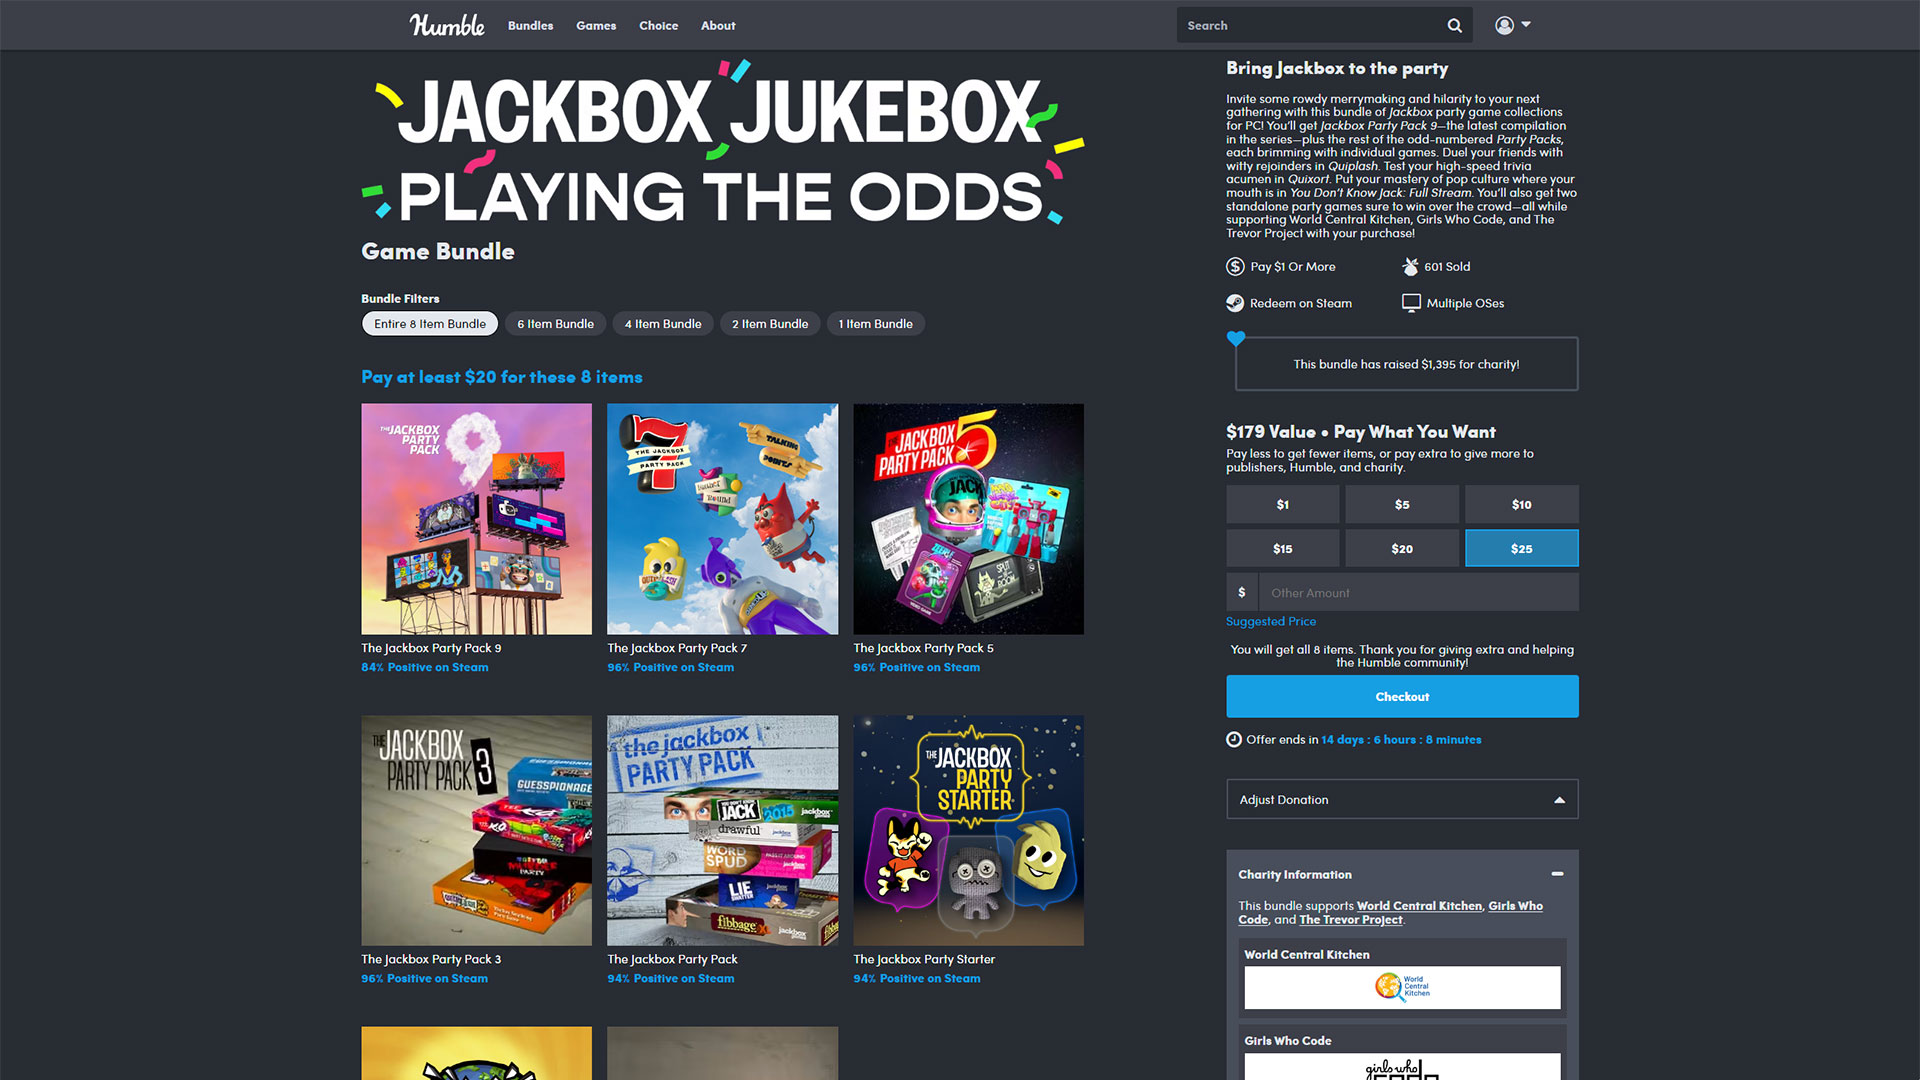 The Jackbox Jukebox bundle gets you eight items if you pay at least $20